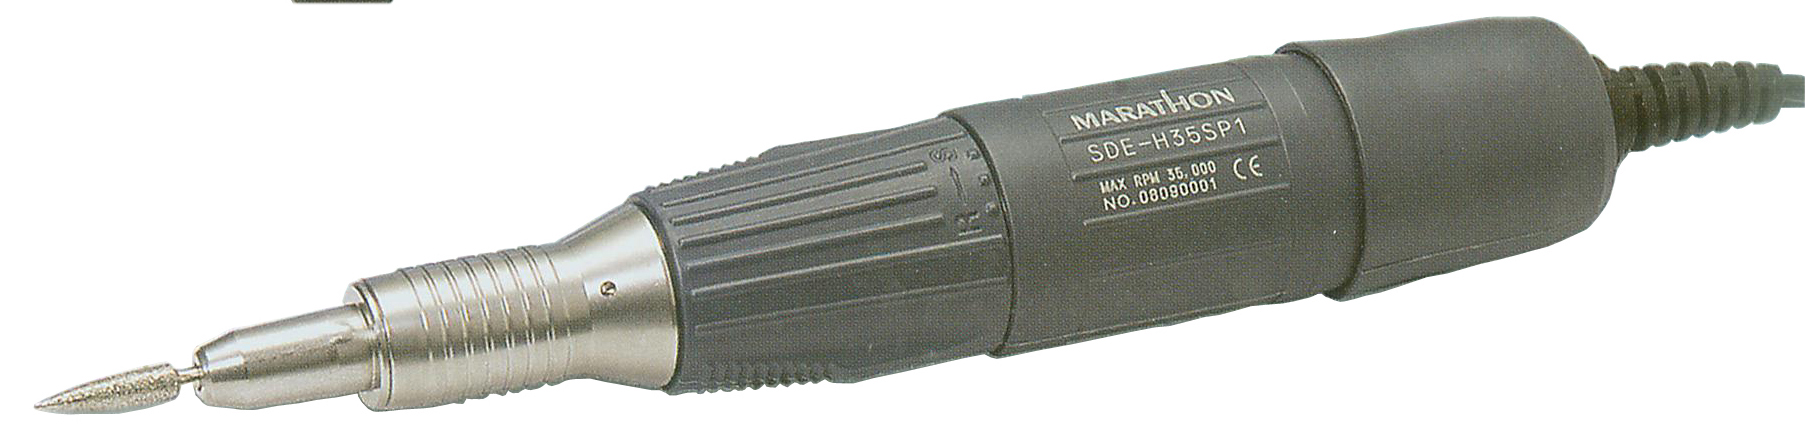 EXTRA HAND PIECE FOR M01050-60 Saeyang # sde-h35sp1 - Click Image to Close